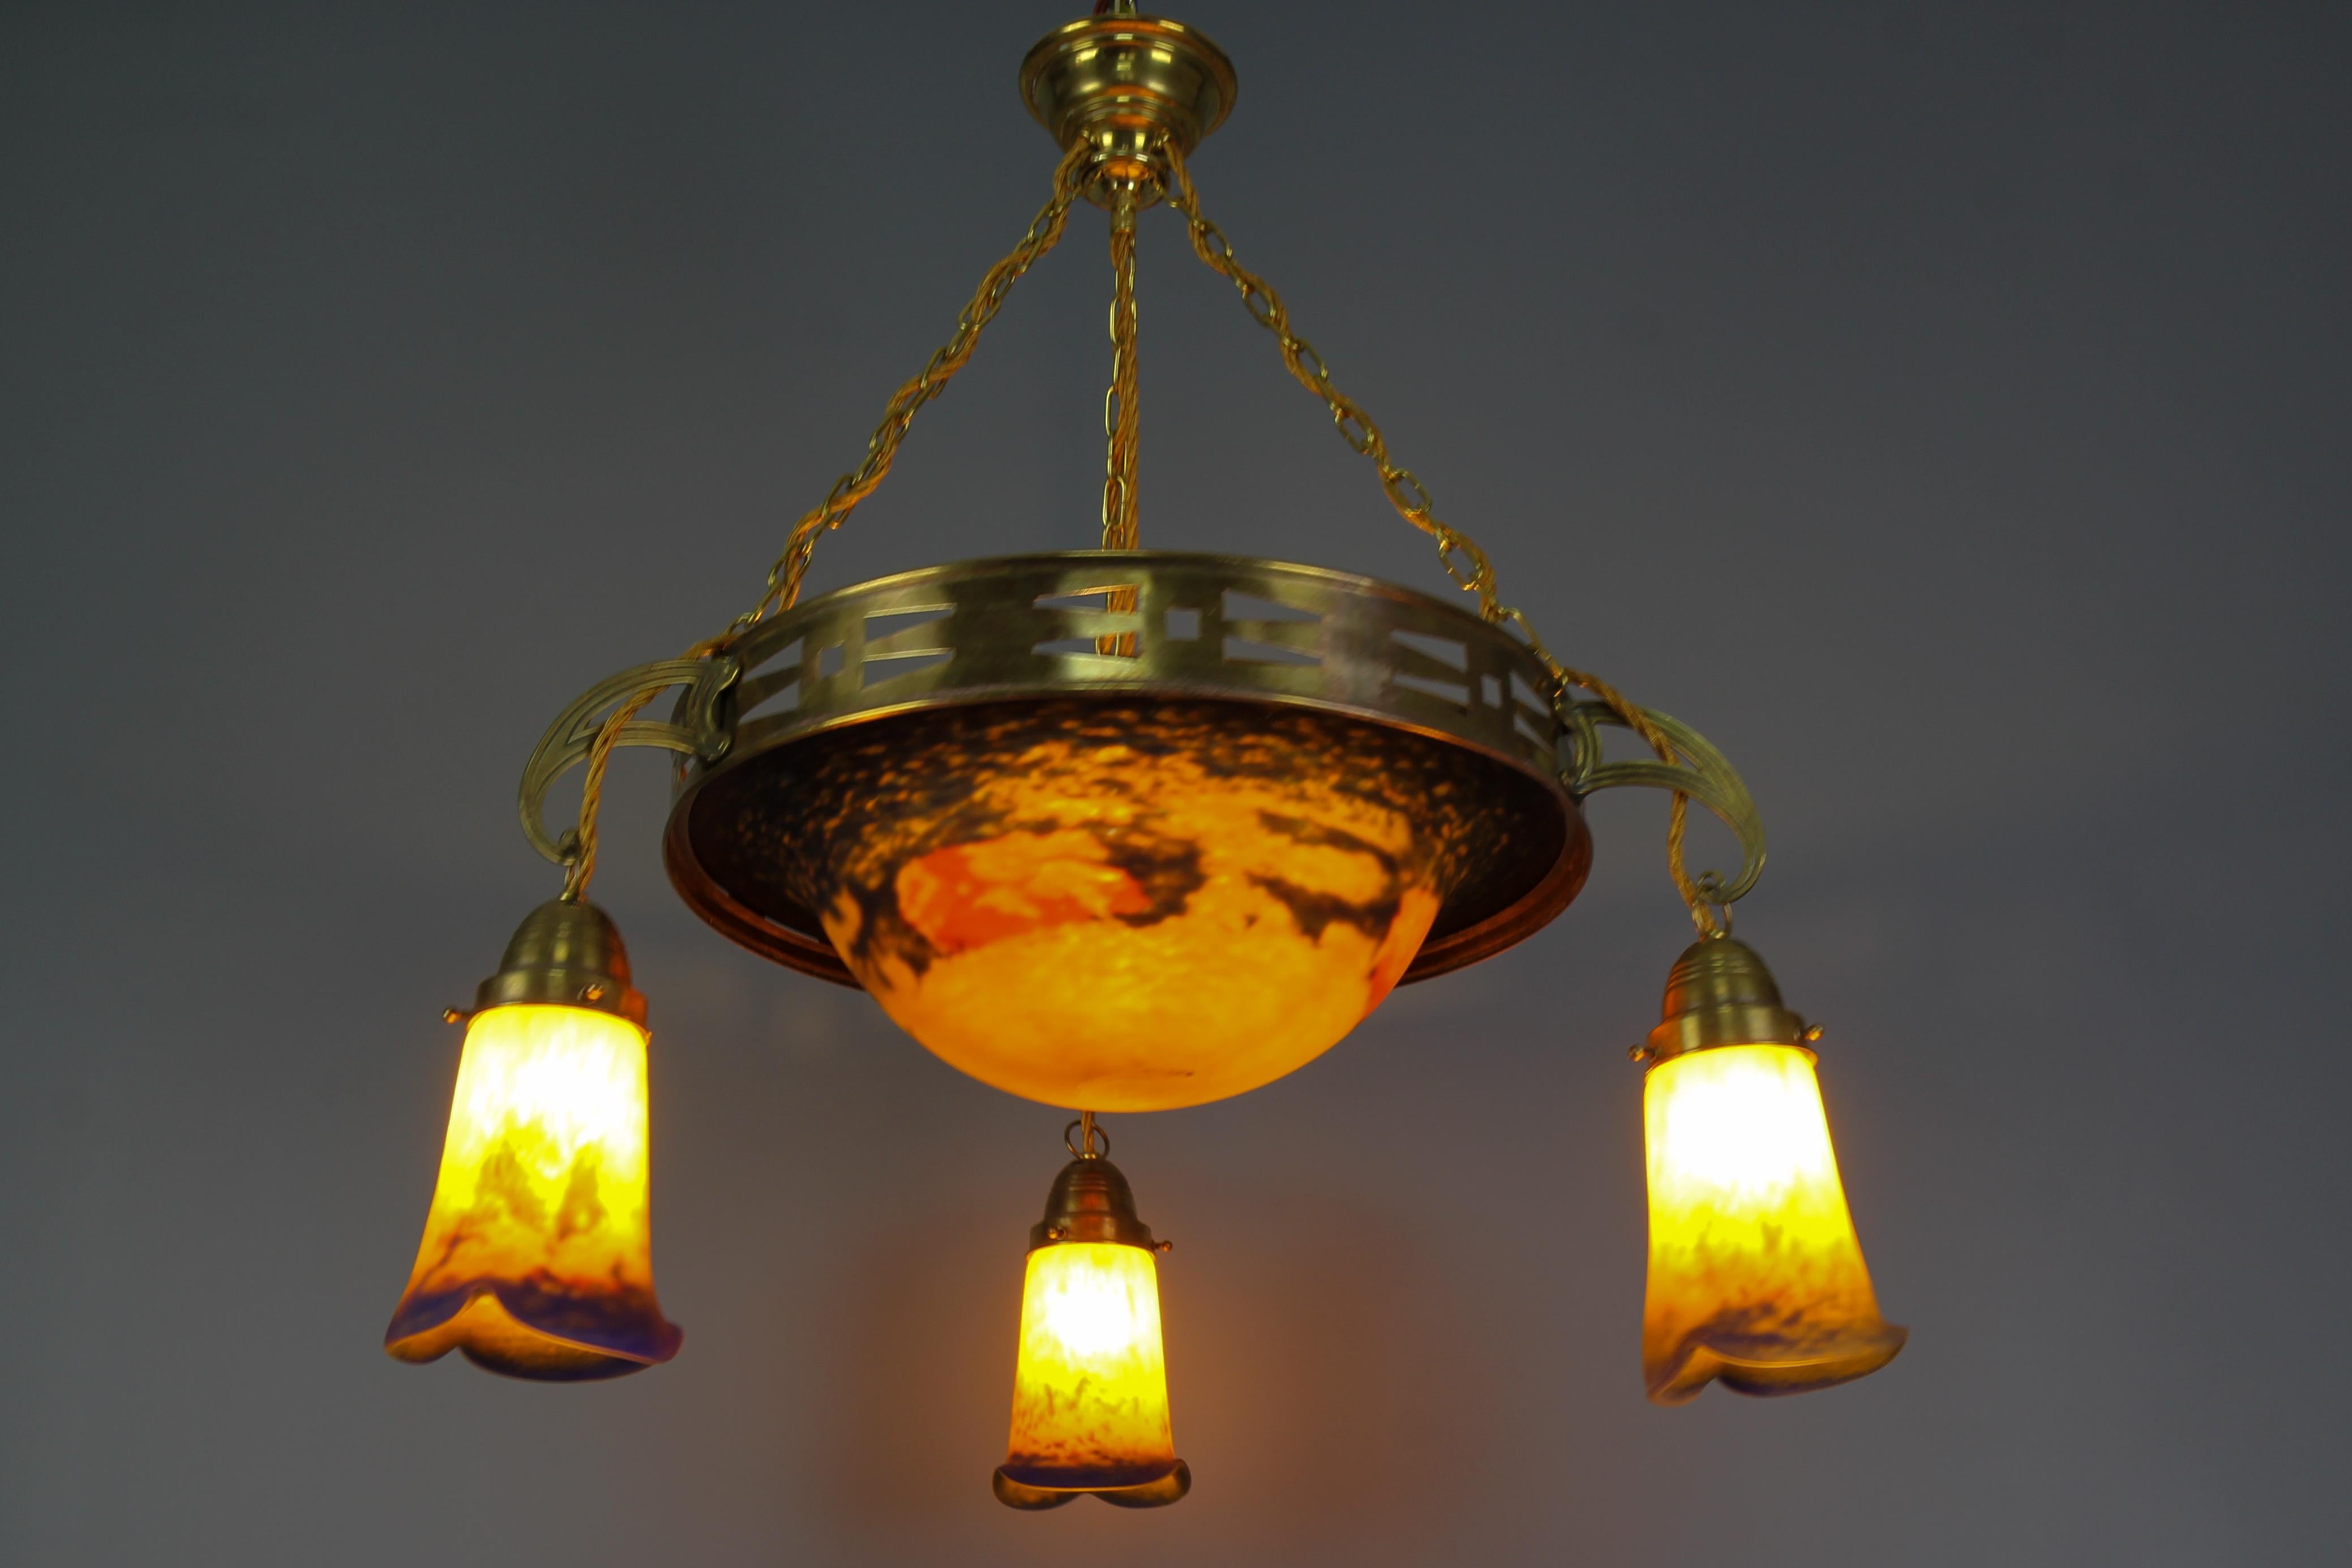 A beautiful four-light Art Nouveau brass pendant chandelier with Pâte de Verre glass by Noverdy.
This impressive French Art Nouveau period chandelier features a central, beautifully shaped “Pâte de Verre” glass bowl in dark yellow, red, and blue